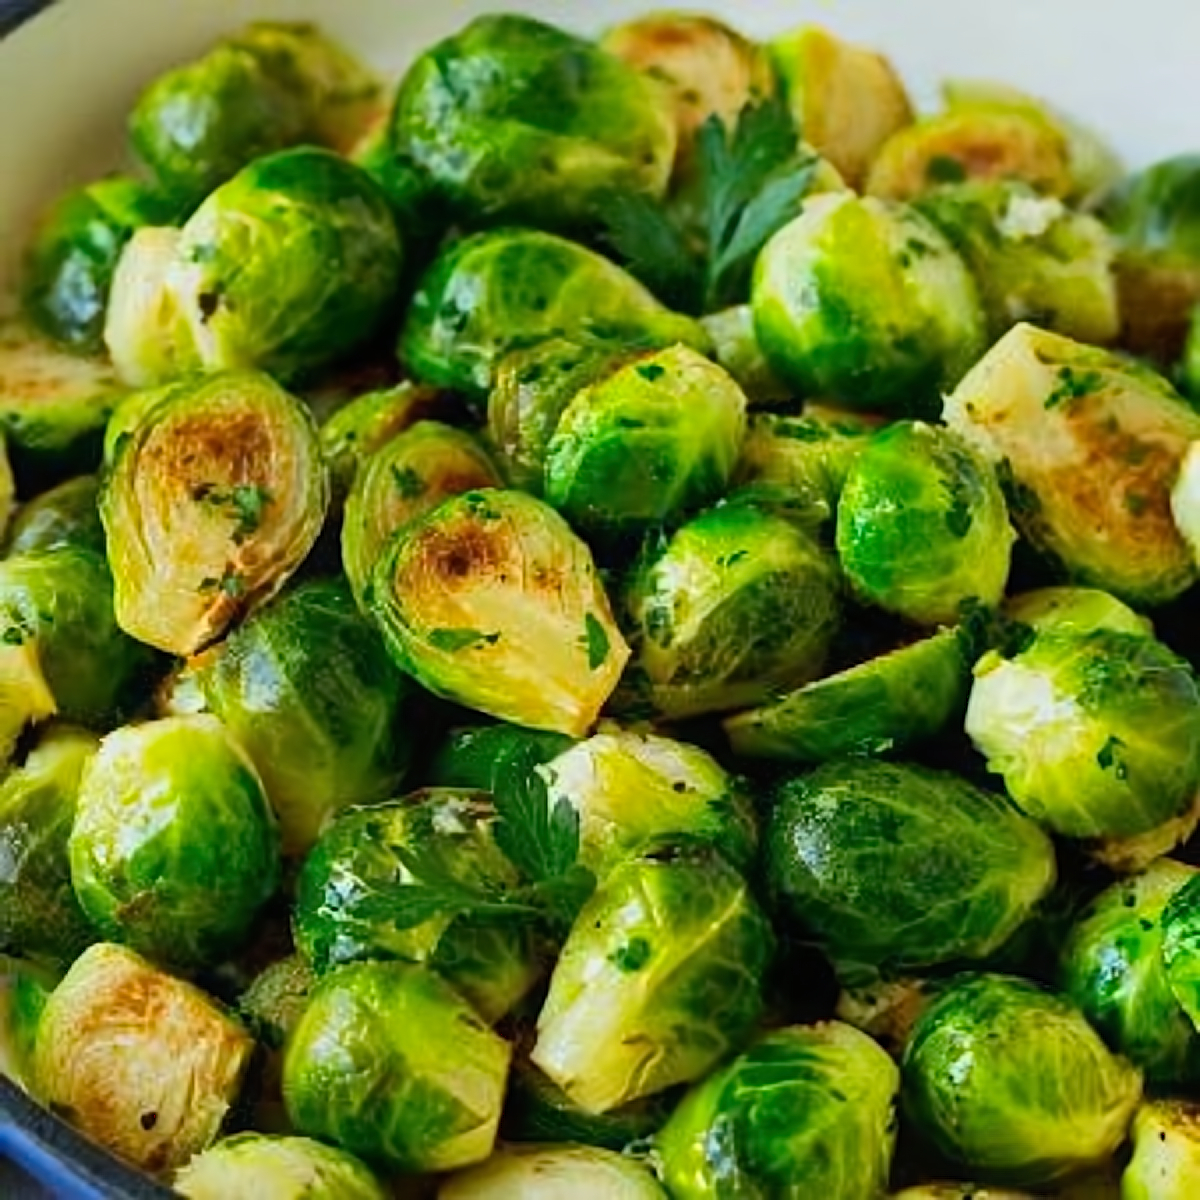 27. Sauteed Brussels Sprouts